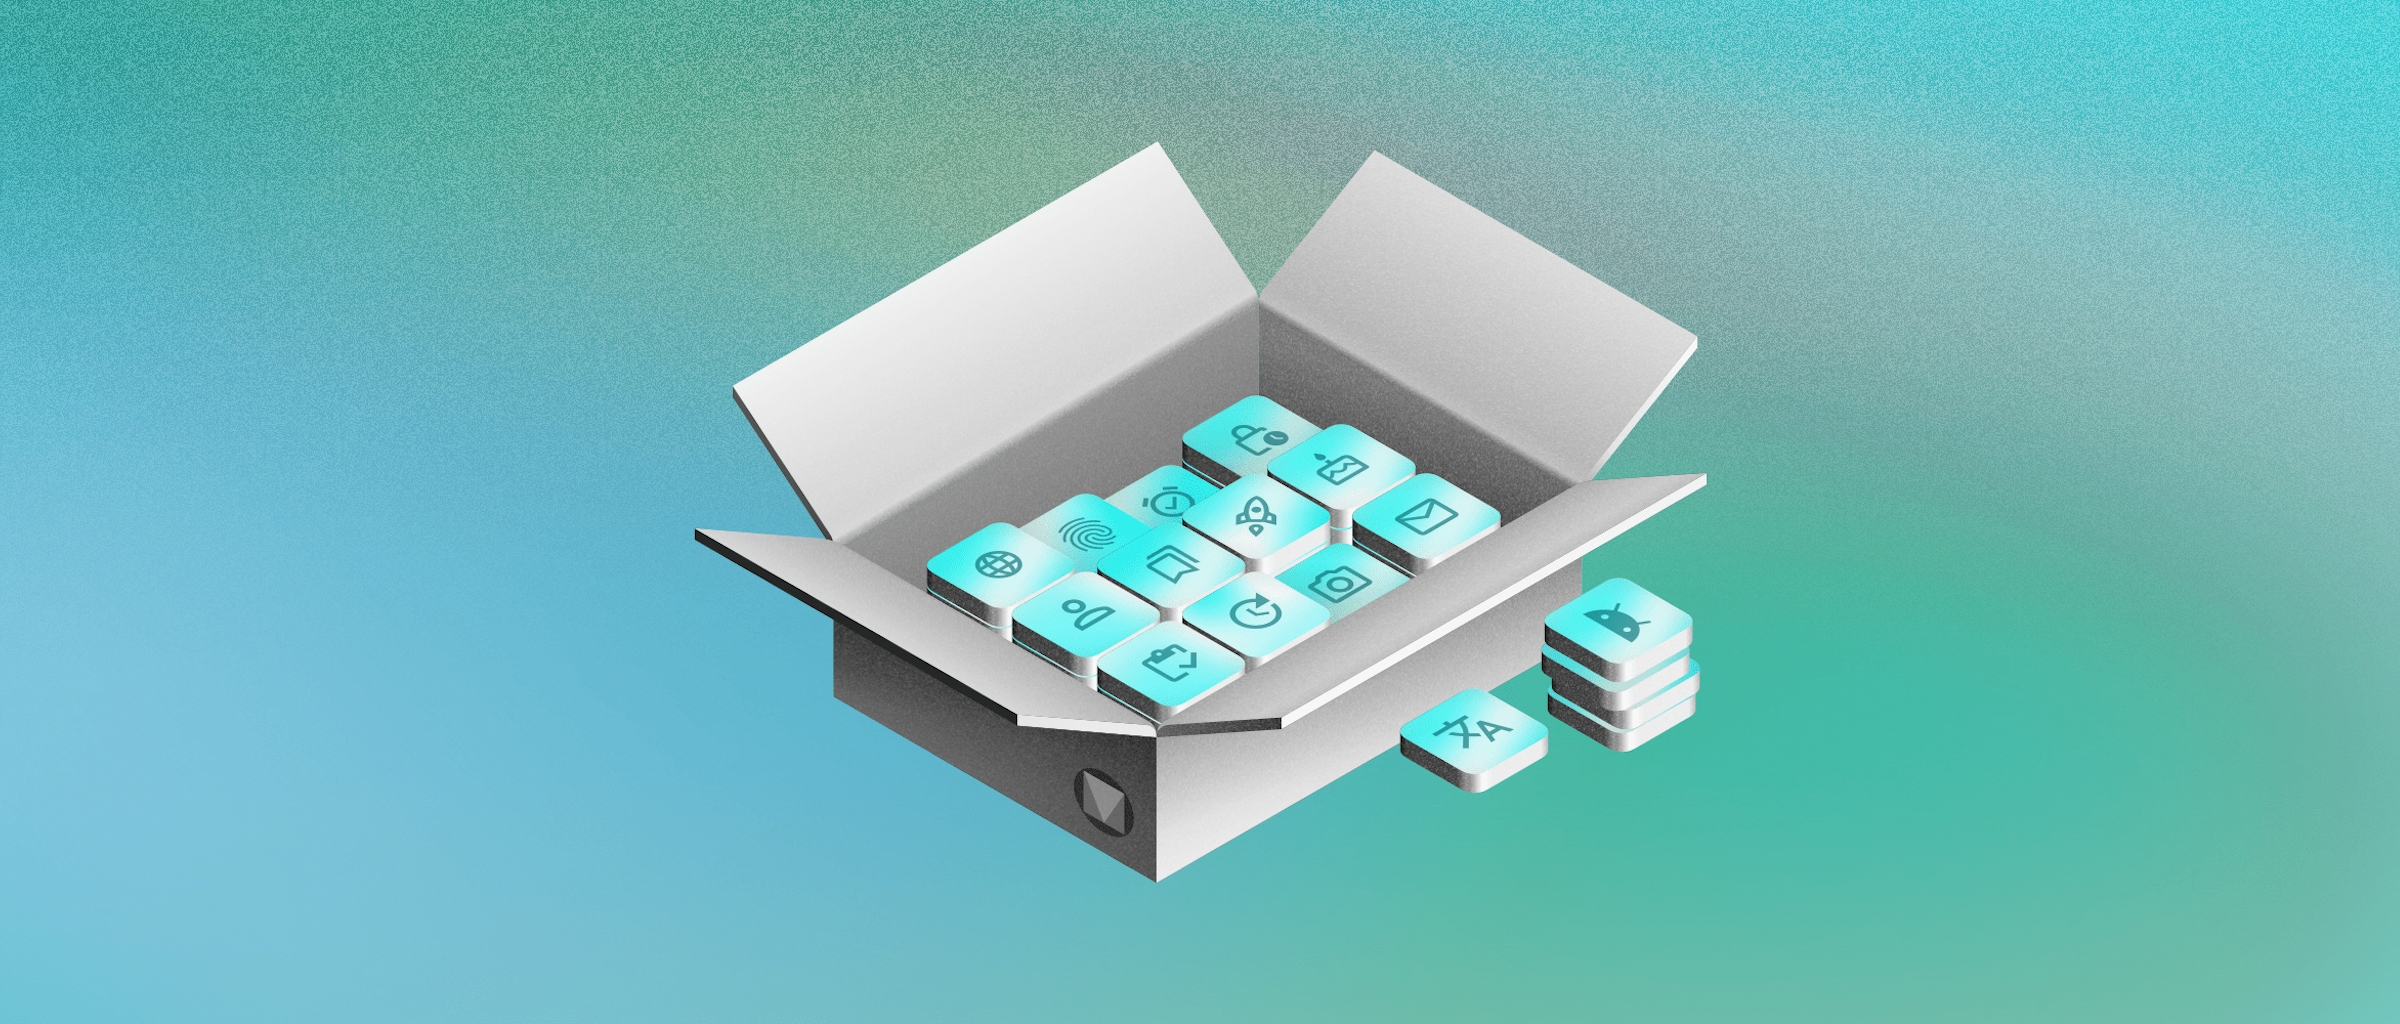 Image showing a box of icons being automatically created in Sketch